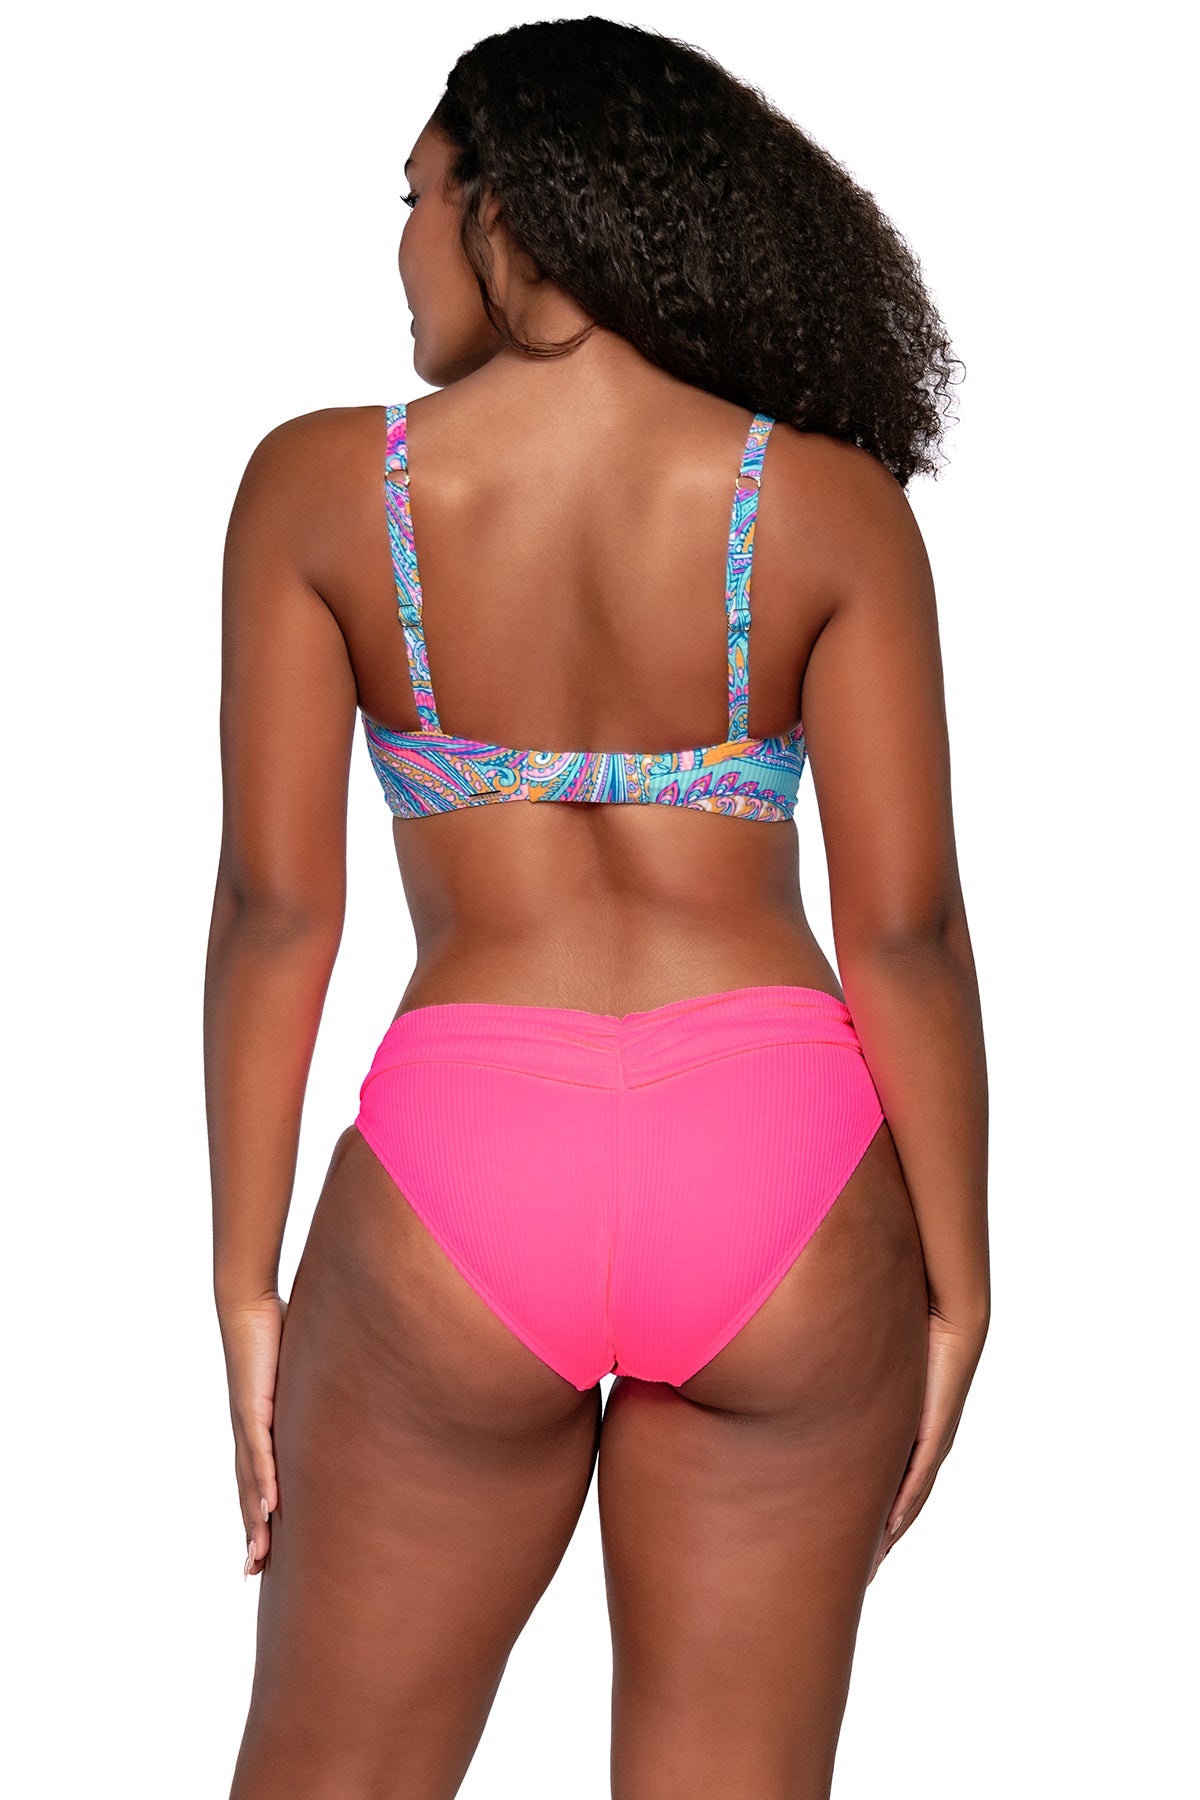 Back view of Sunsets Paisley Pop Crossroads Underwire Top with matching Unforgettable Bottom bikini